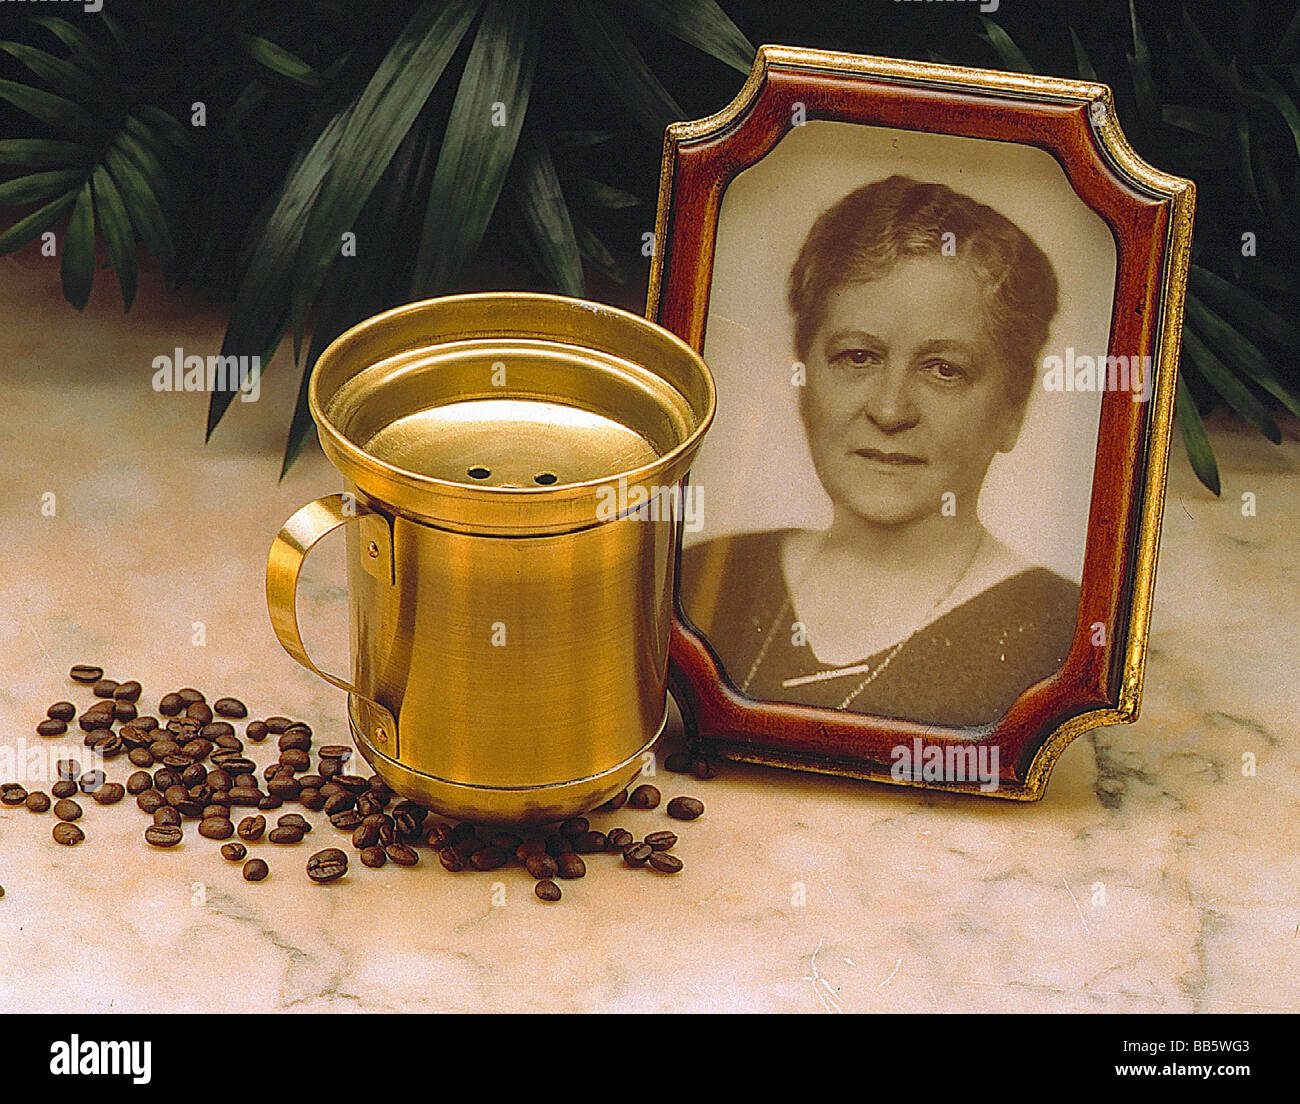 Bentz, Melitta, 31.1.1873 - 29.6.1950, German businesswoman (Melitta), and inventor of coffee filter, stilllife with portrait and coffee, Stock Photo